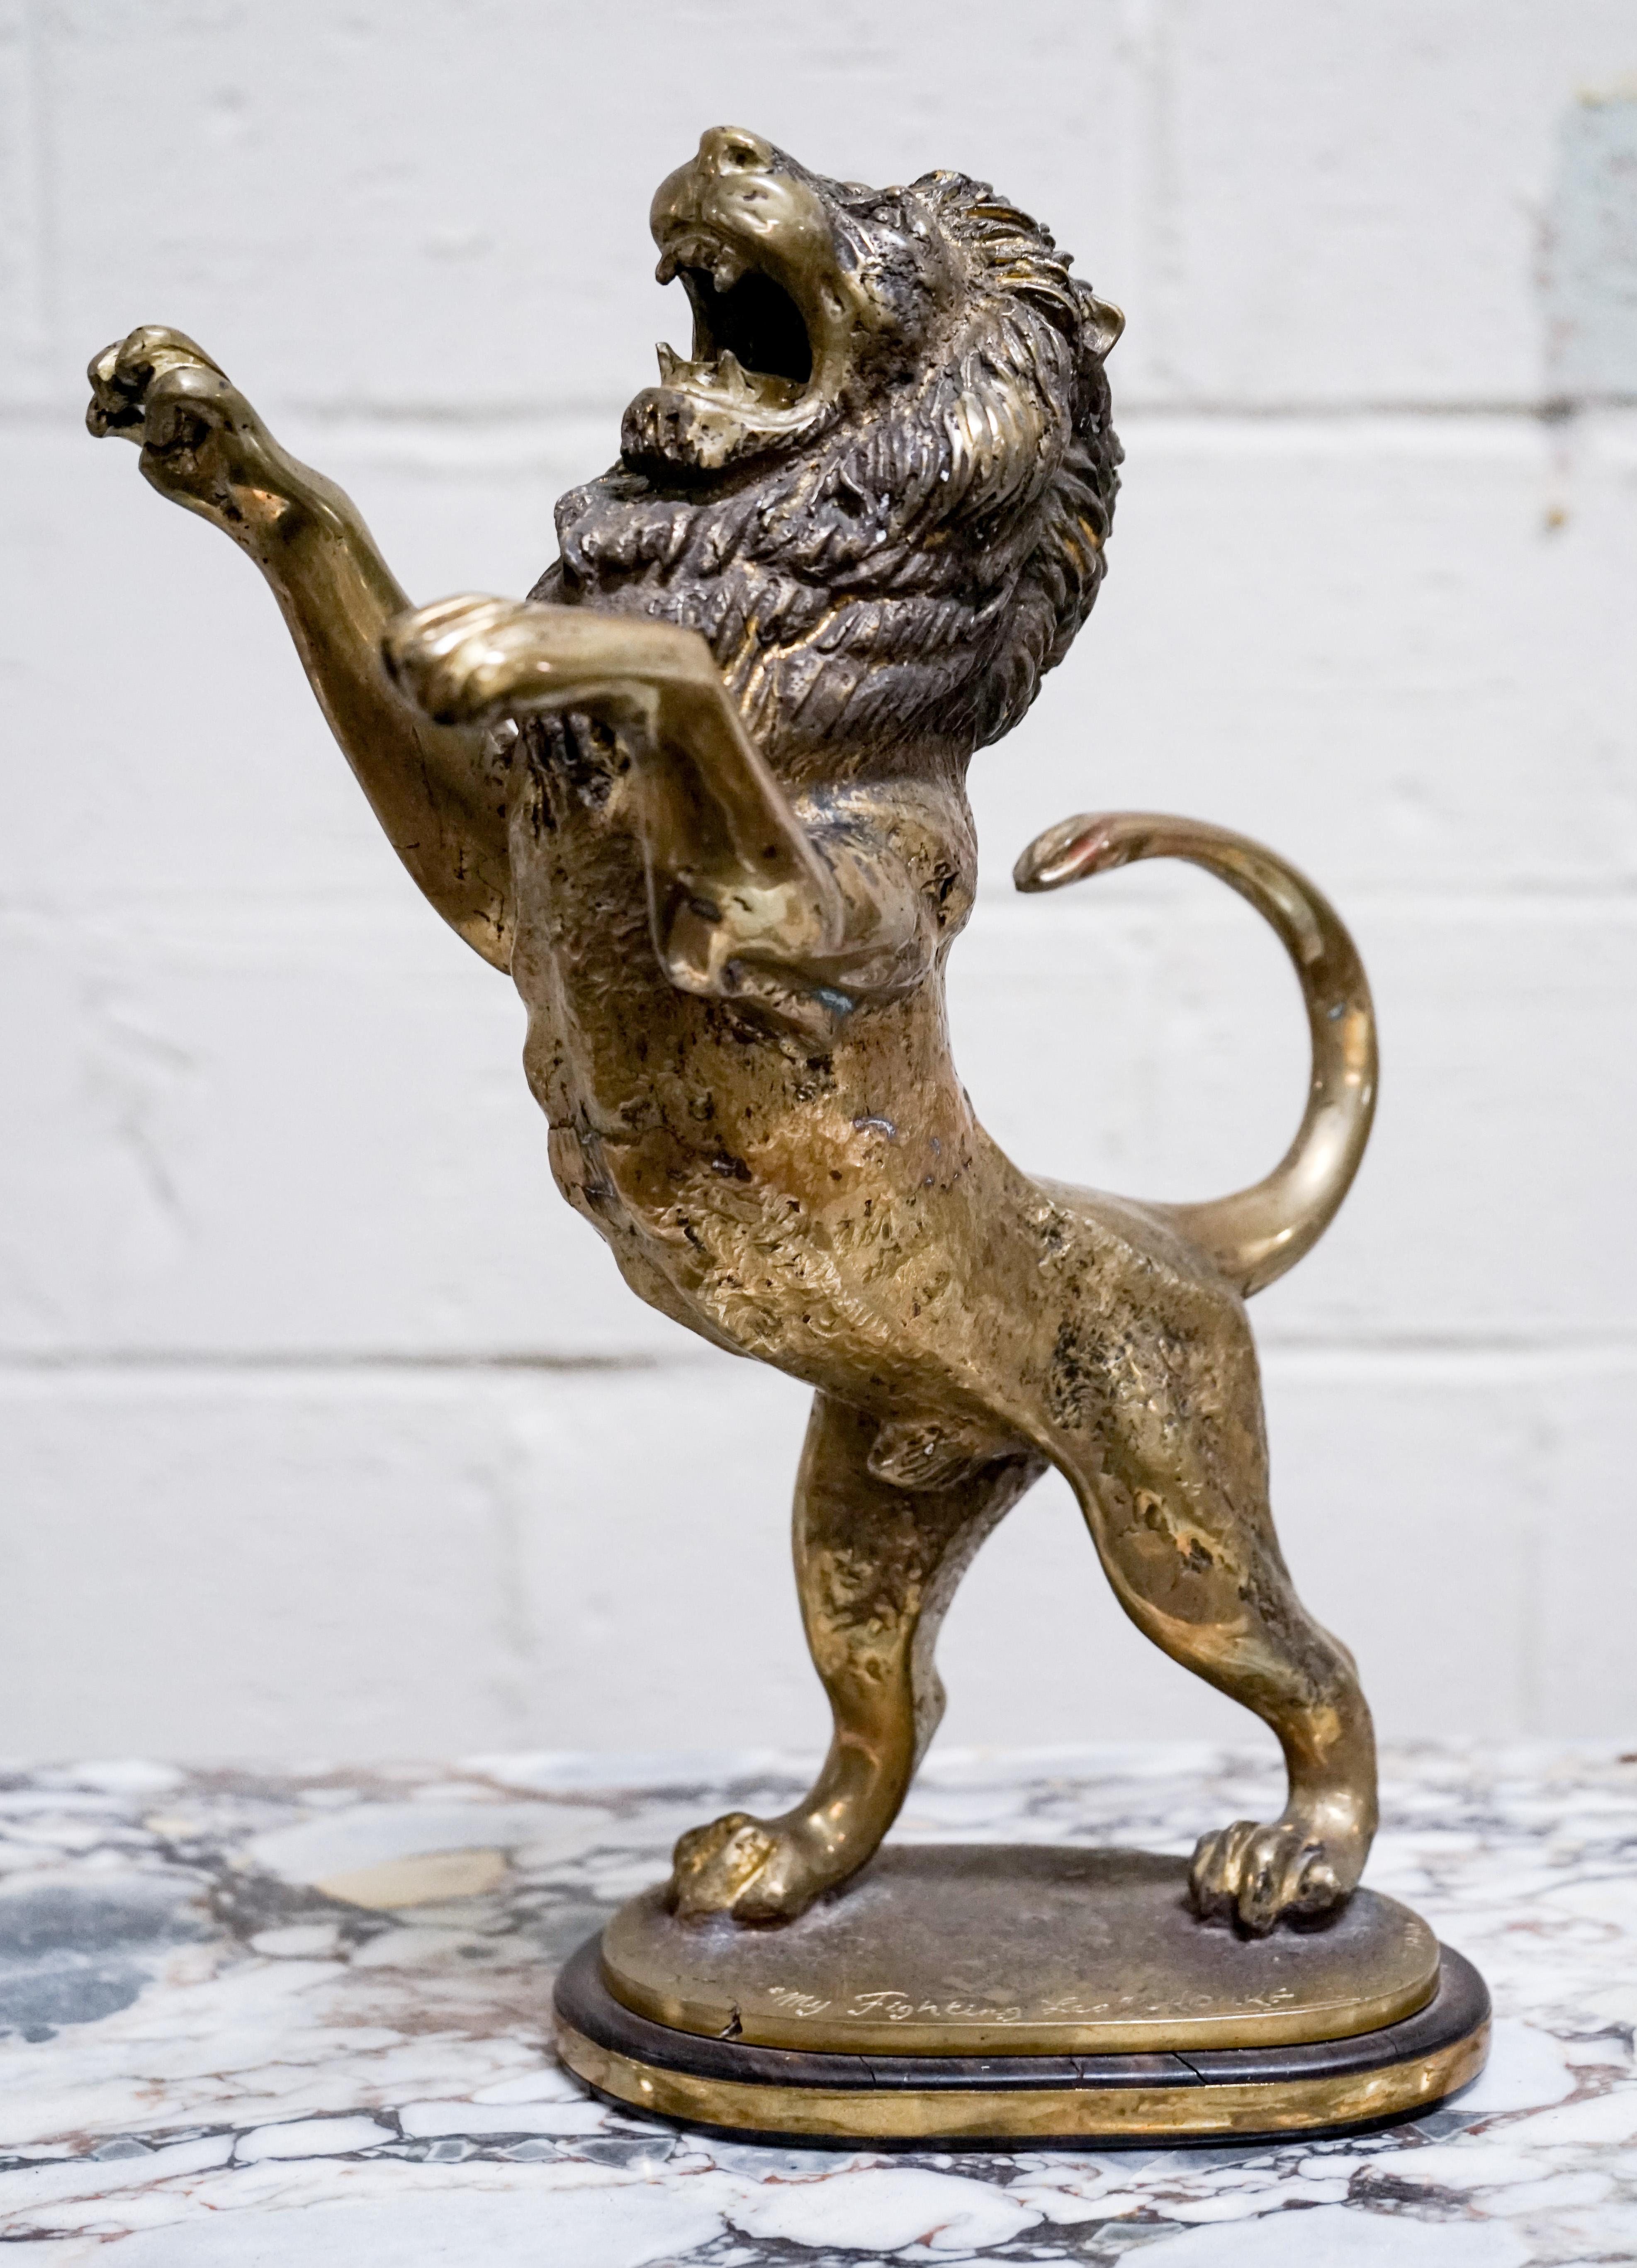 This bronze sculpture of a lion stands a foot tall and makes for an excellent piece for a library or study. Signed and dated by the artist 'Aouke' in 1990 in Zaire.

Measurements: 12.5'' H x 10'' W.